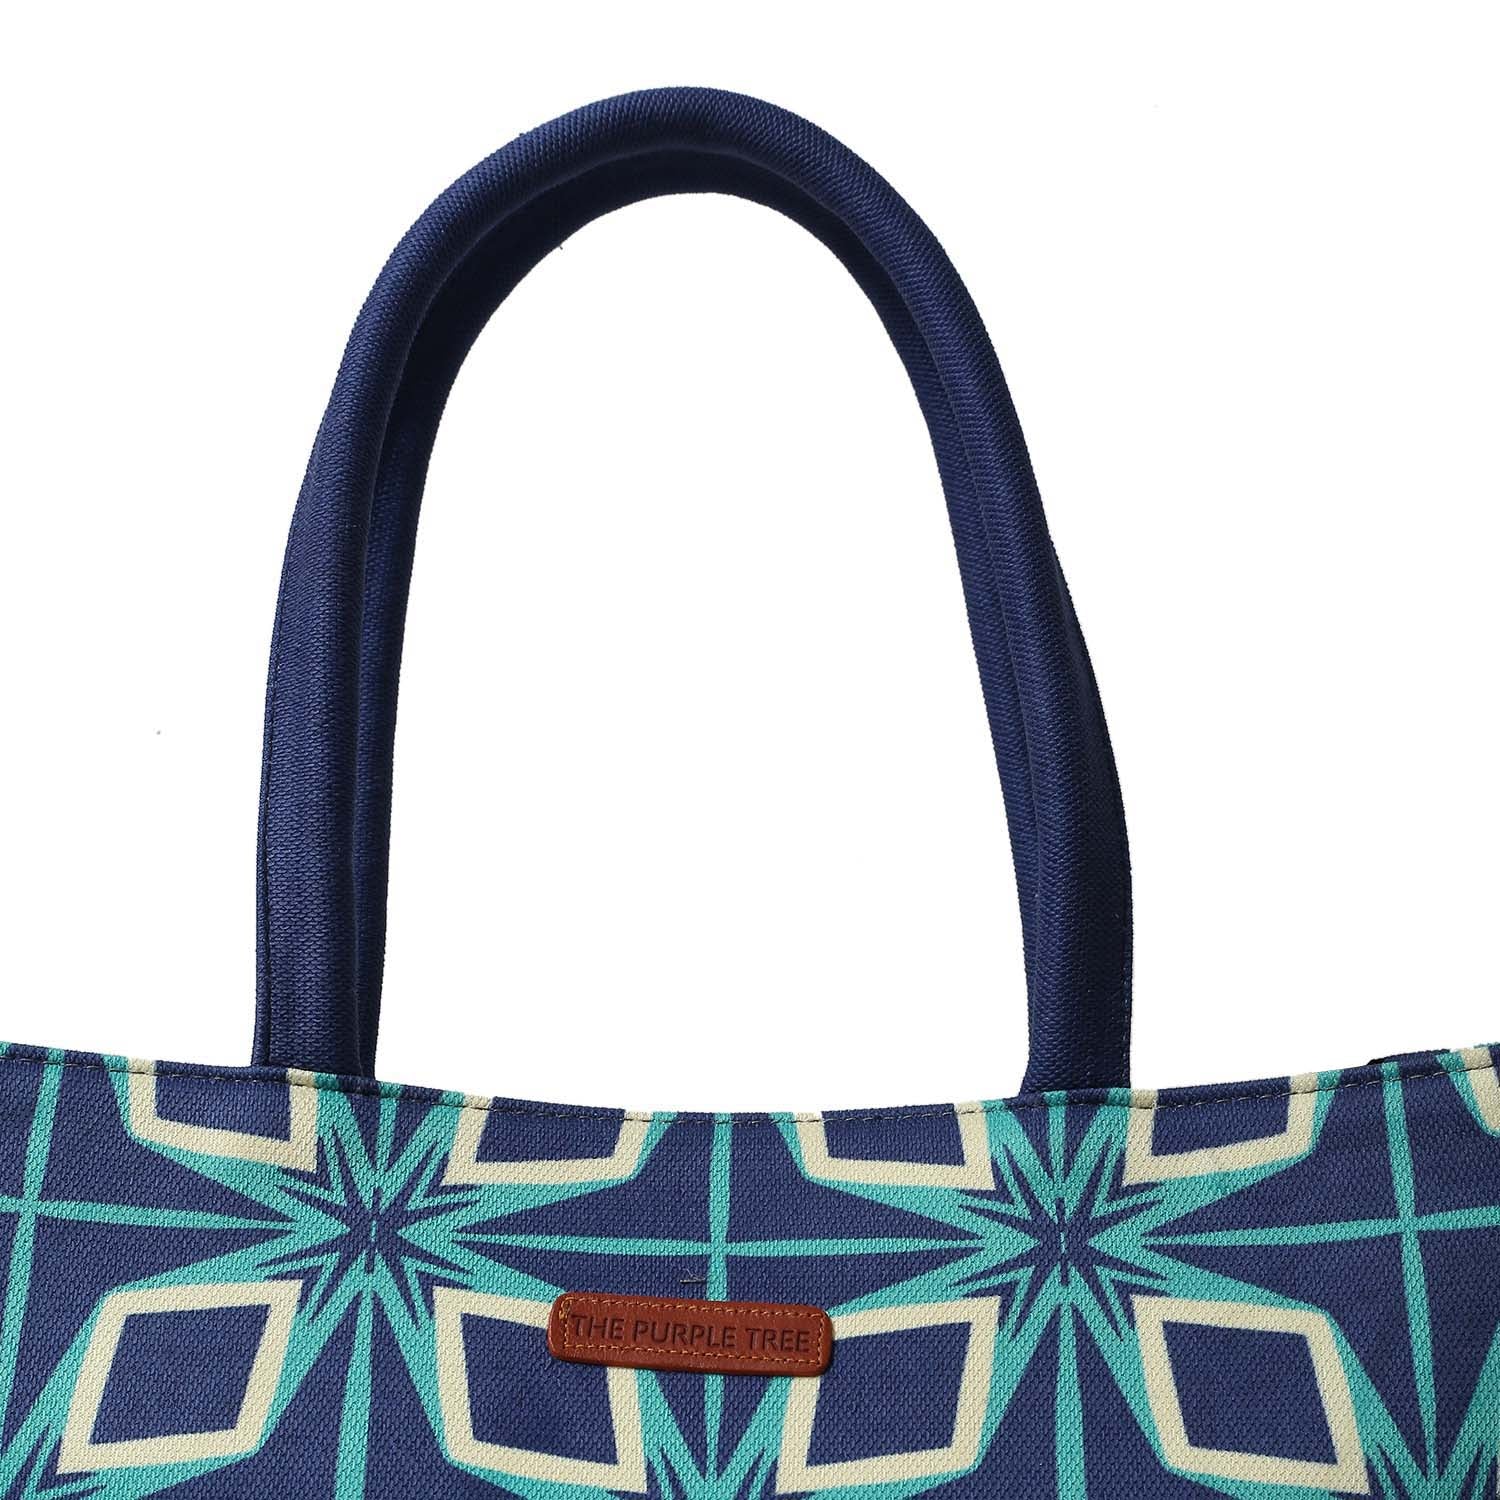 A stylish tote bag with a blue and green pattern, accompanied by a book and another book.